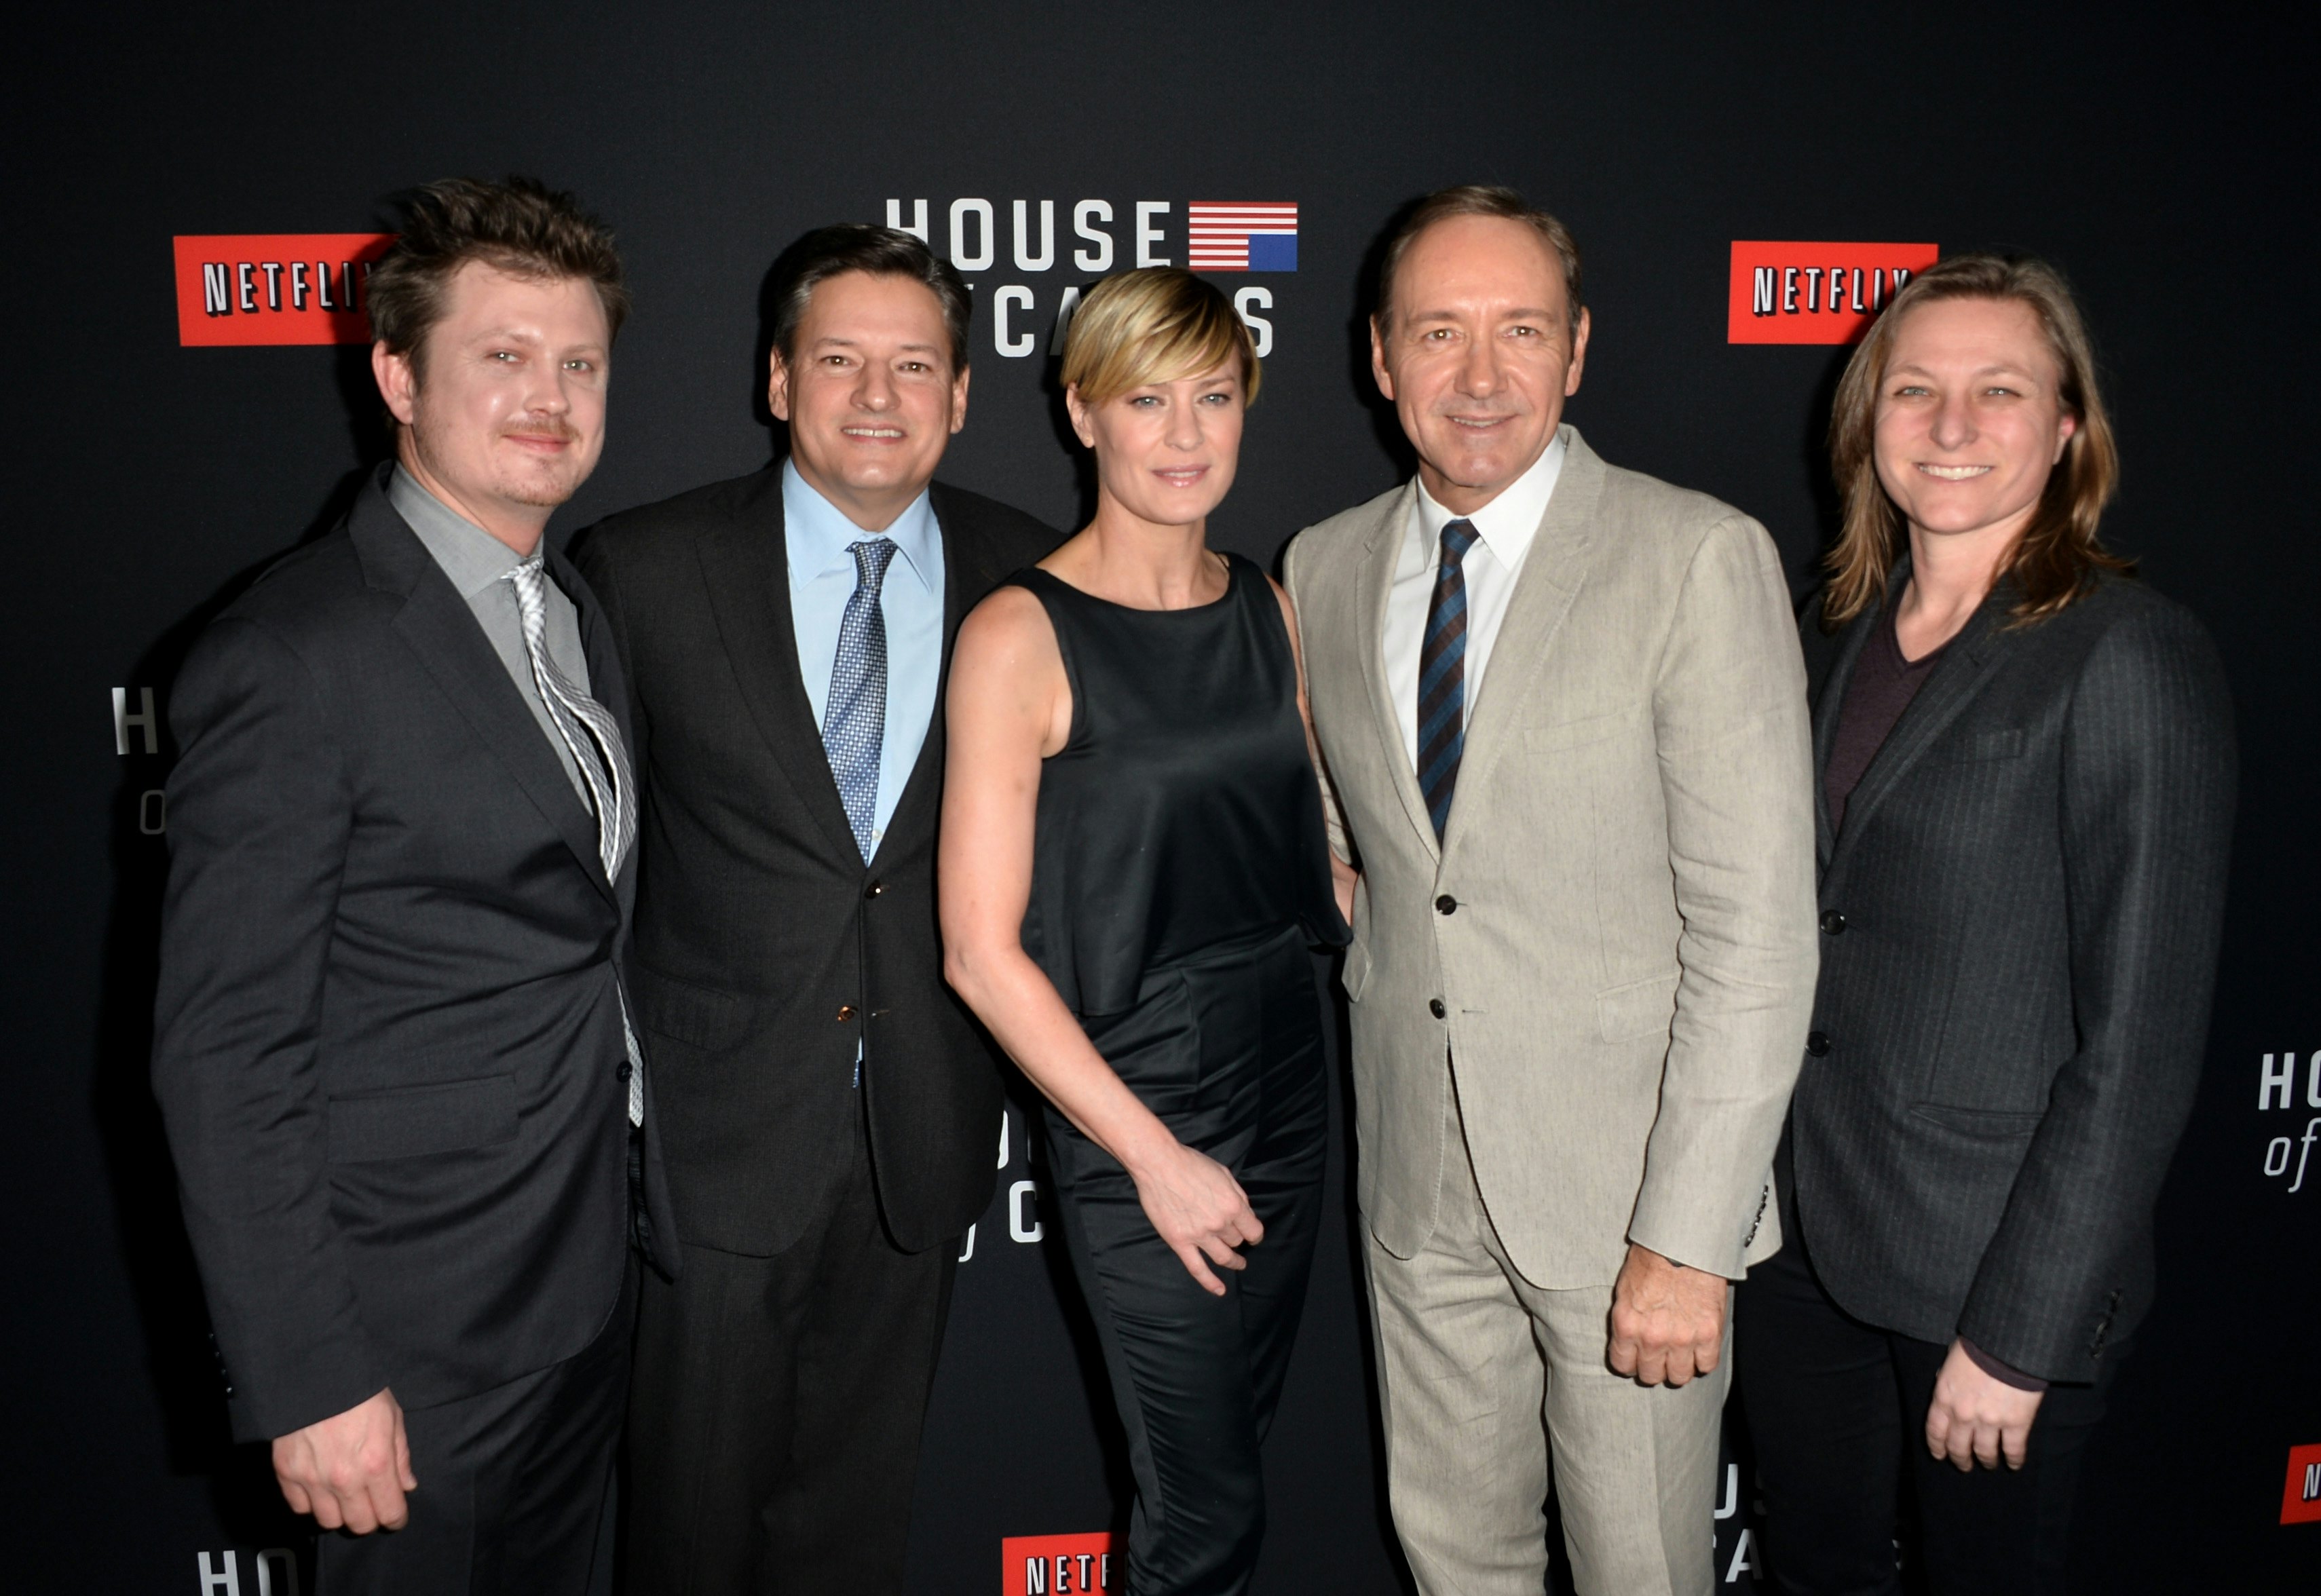 house of cards season 4 download